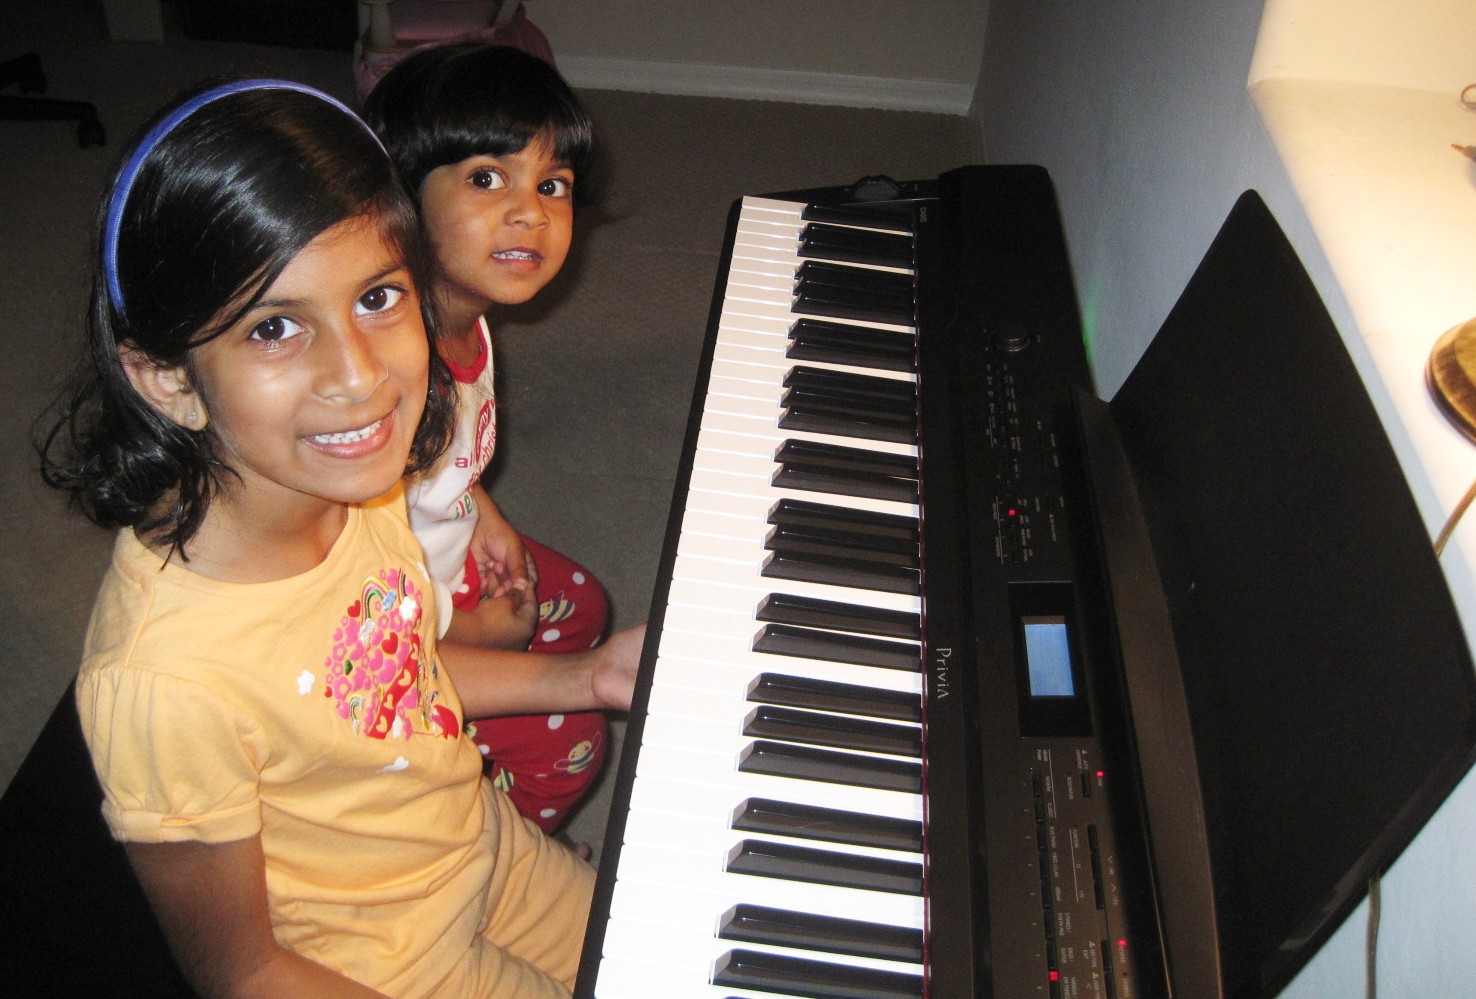 Piano Lessons 4 Children - free online piano and music lessons